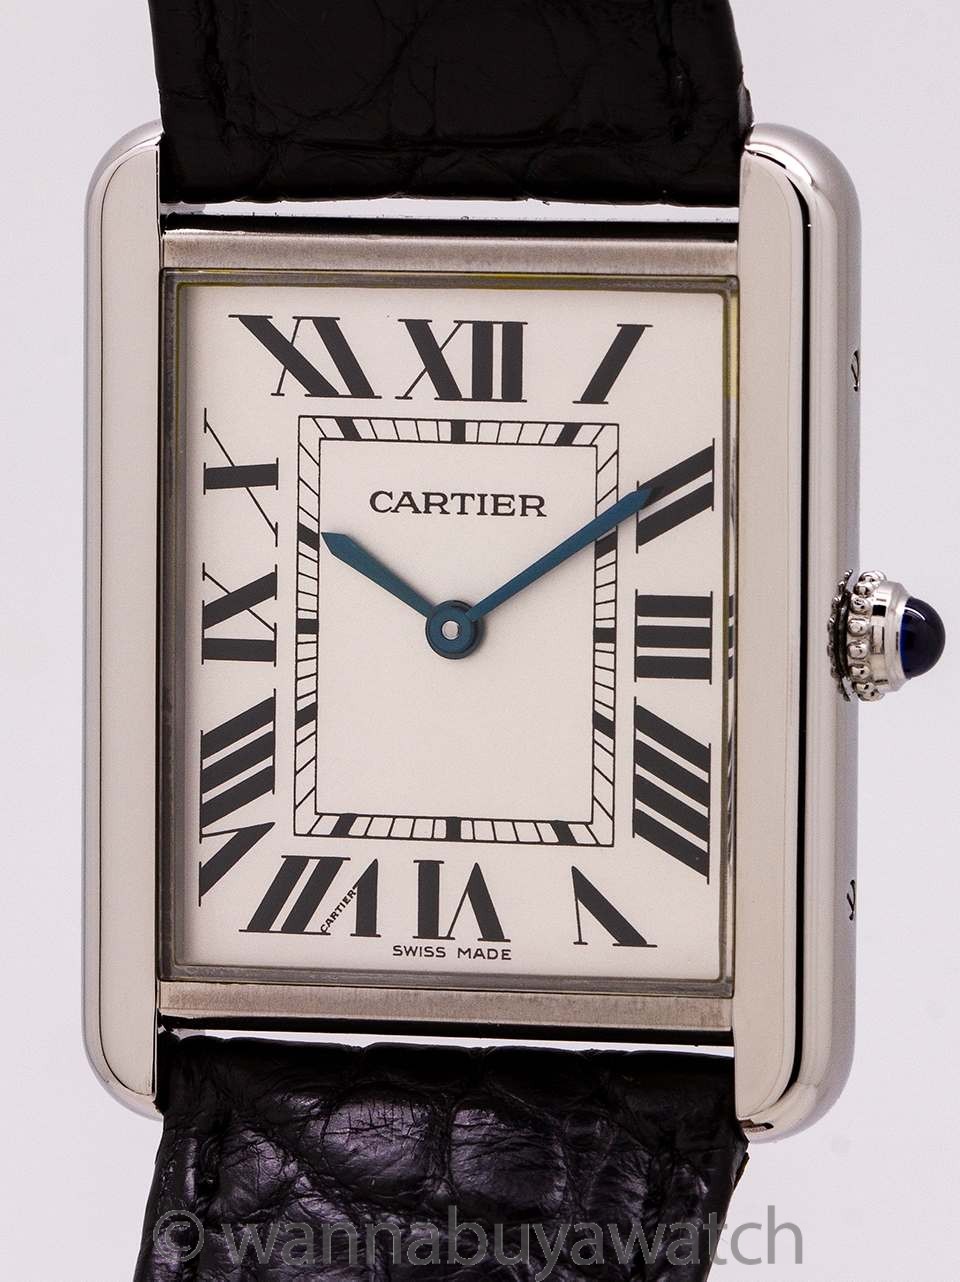 Cartier Tank Solo Large Ref. 3169 Stainless Steel Silver Roman Dial Quartz Mens Watch.27mm